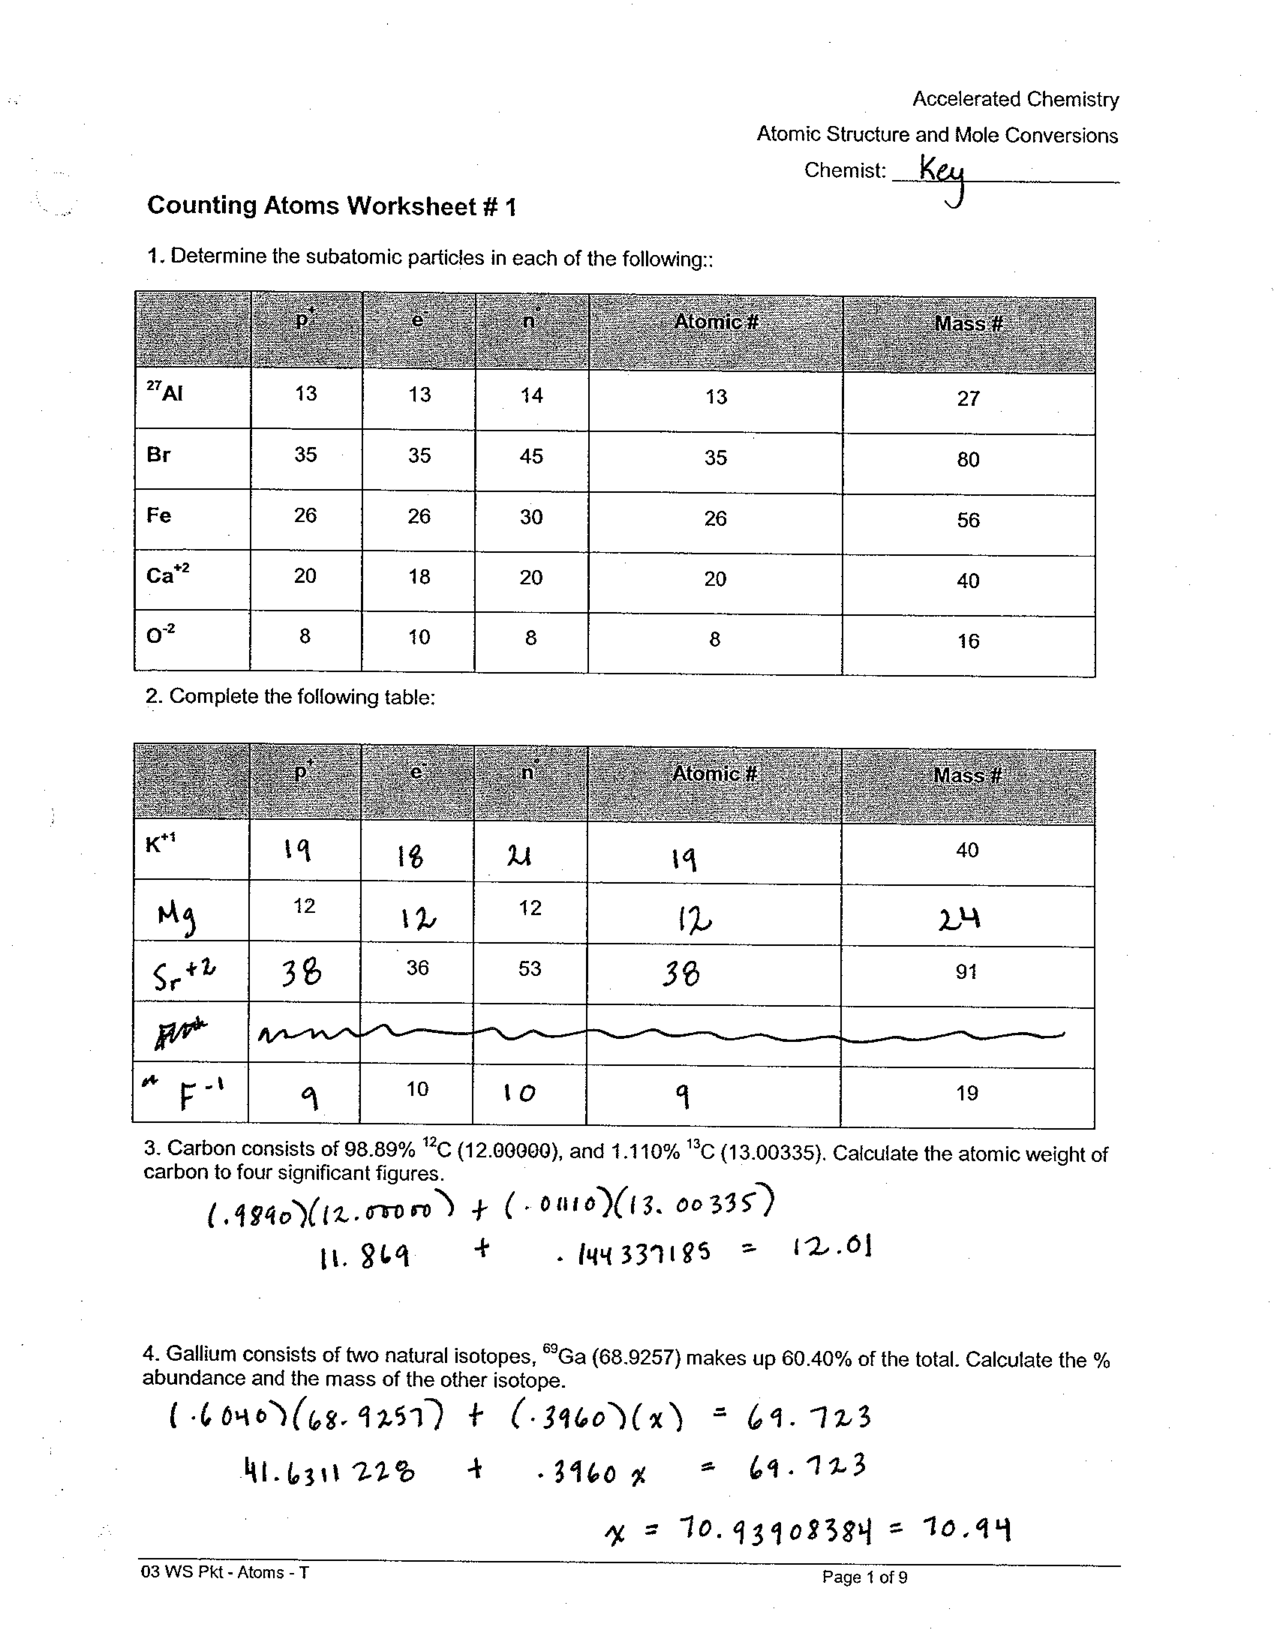 Counting Atoms Worksheet Answer Key